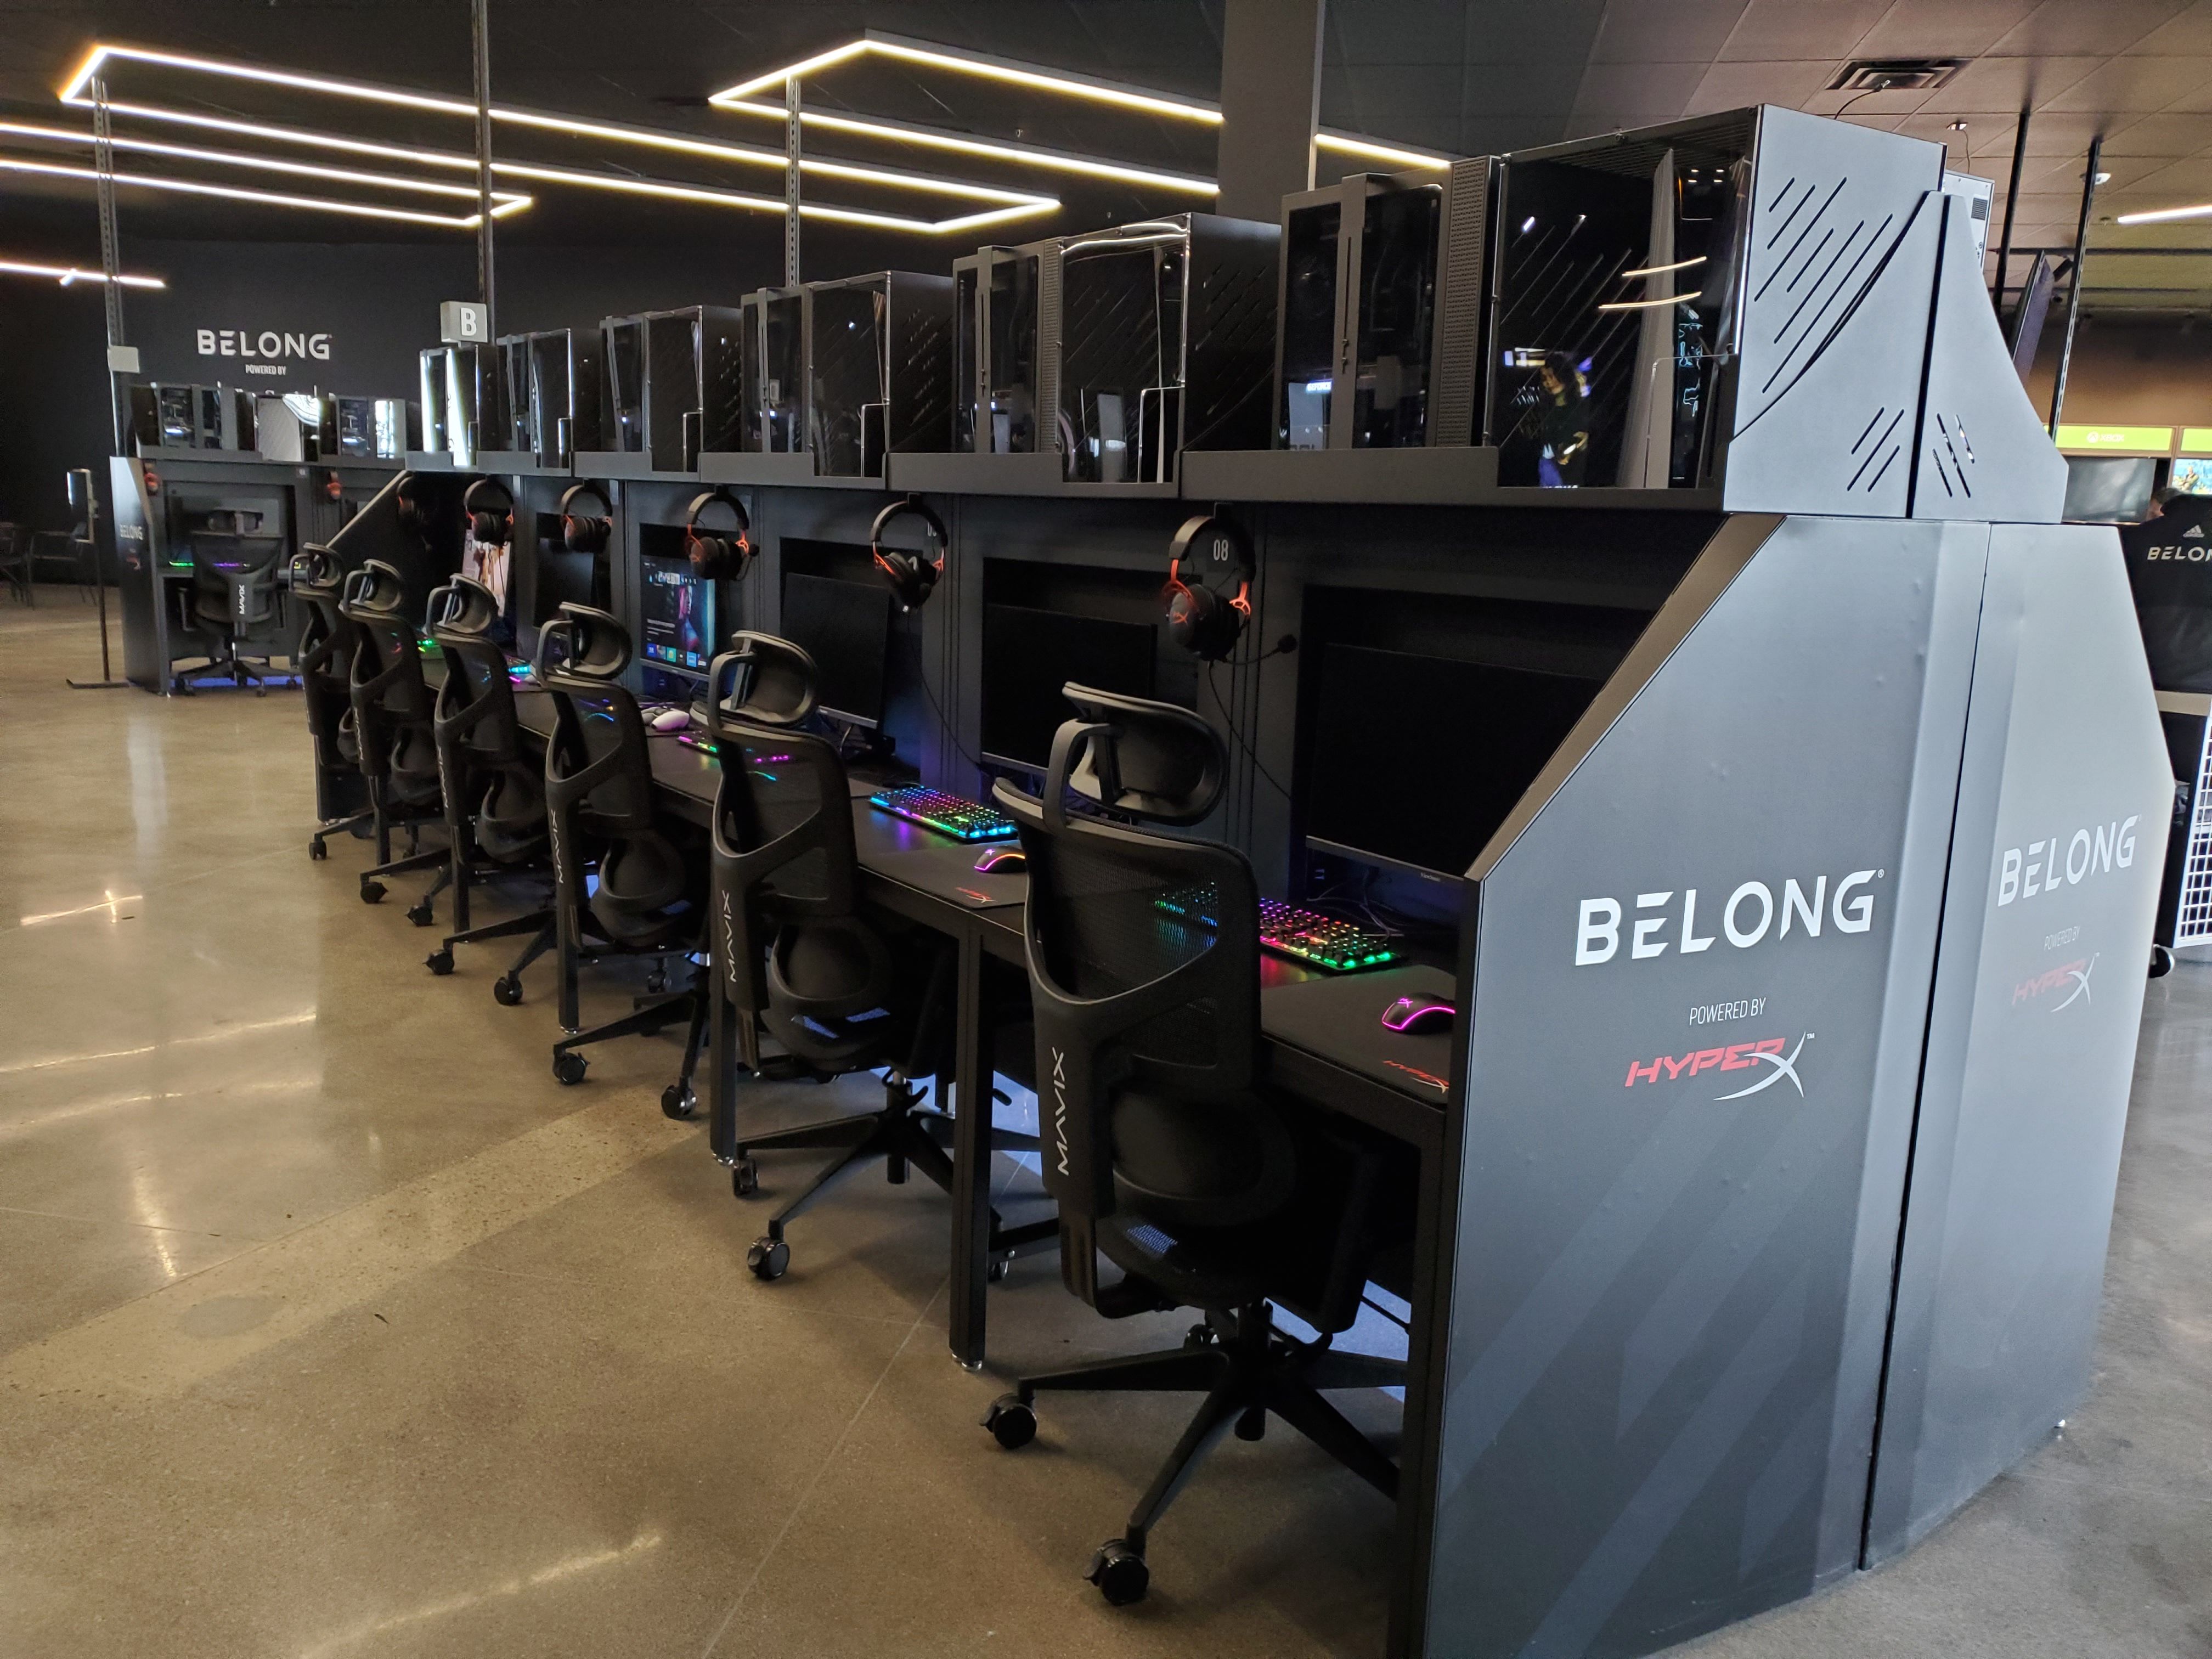 A row of PC gaming stations at an esports arena.